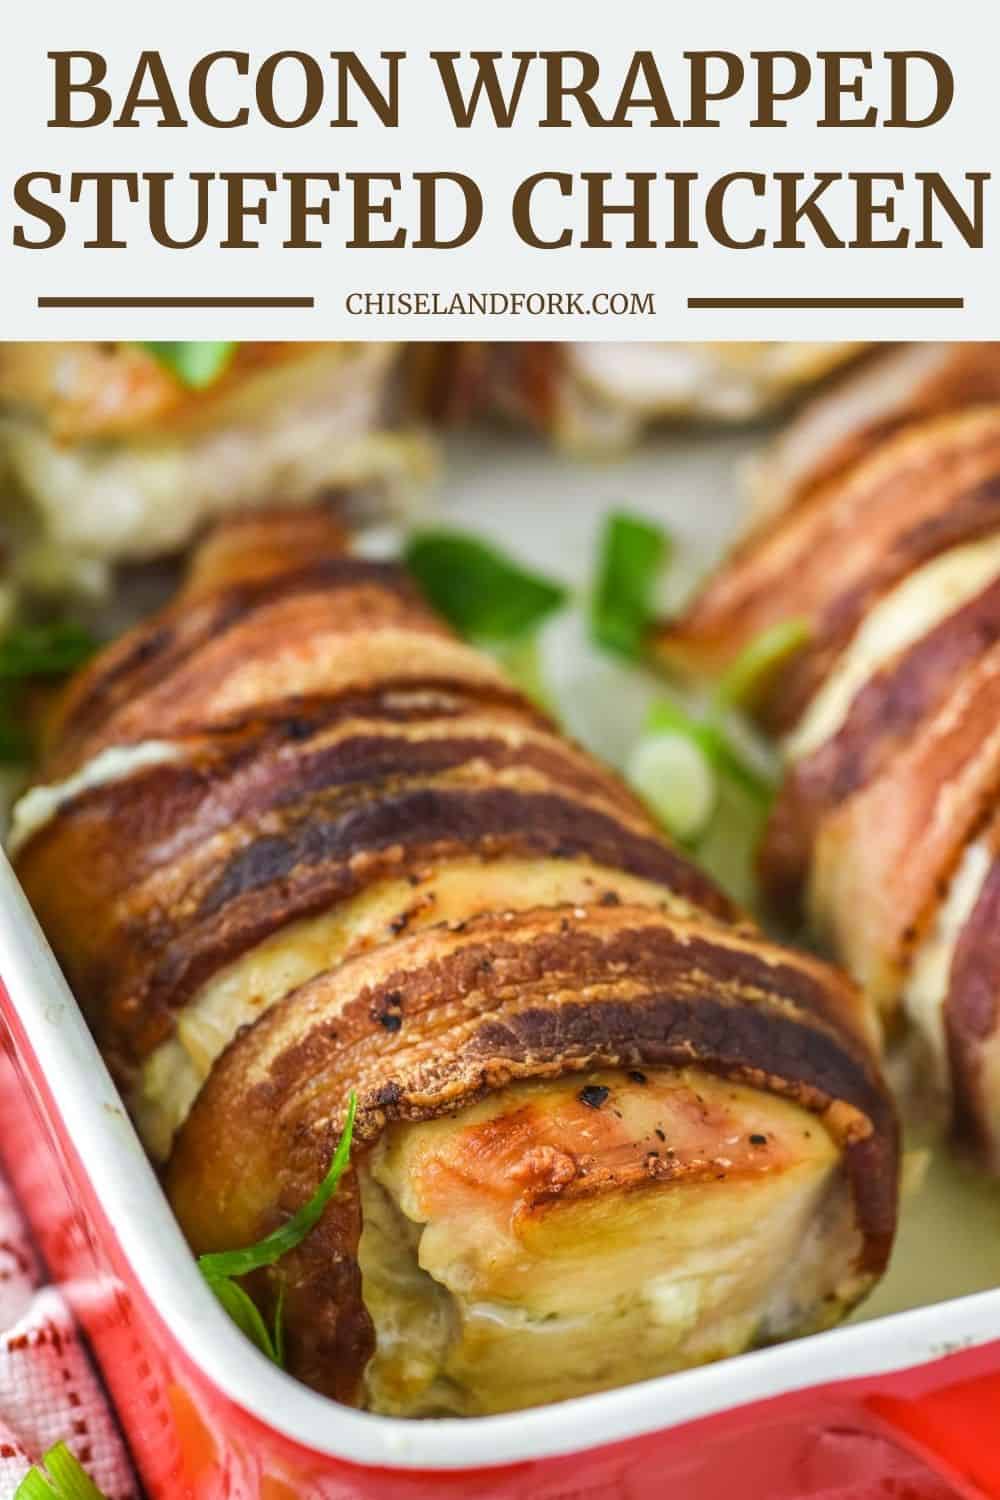 Bacon Wrapped Stuffed Chicken Recipe - Chisel & Fork